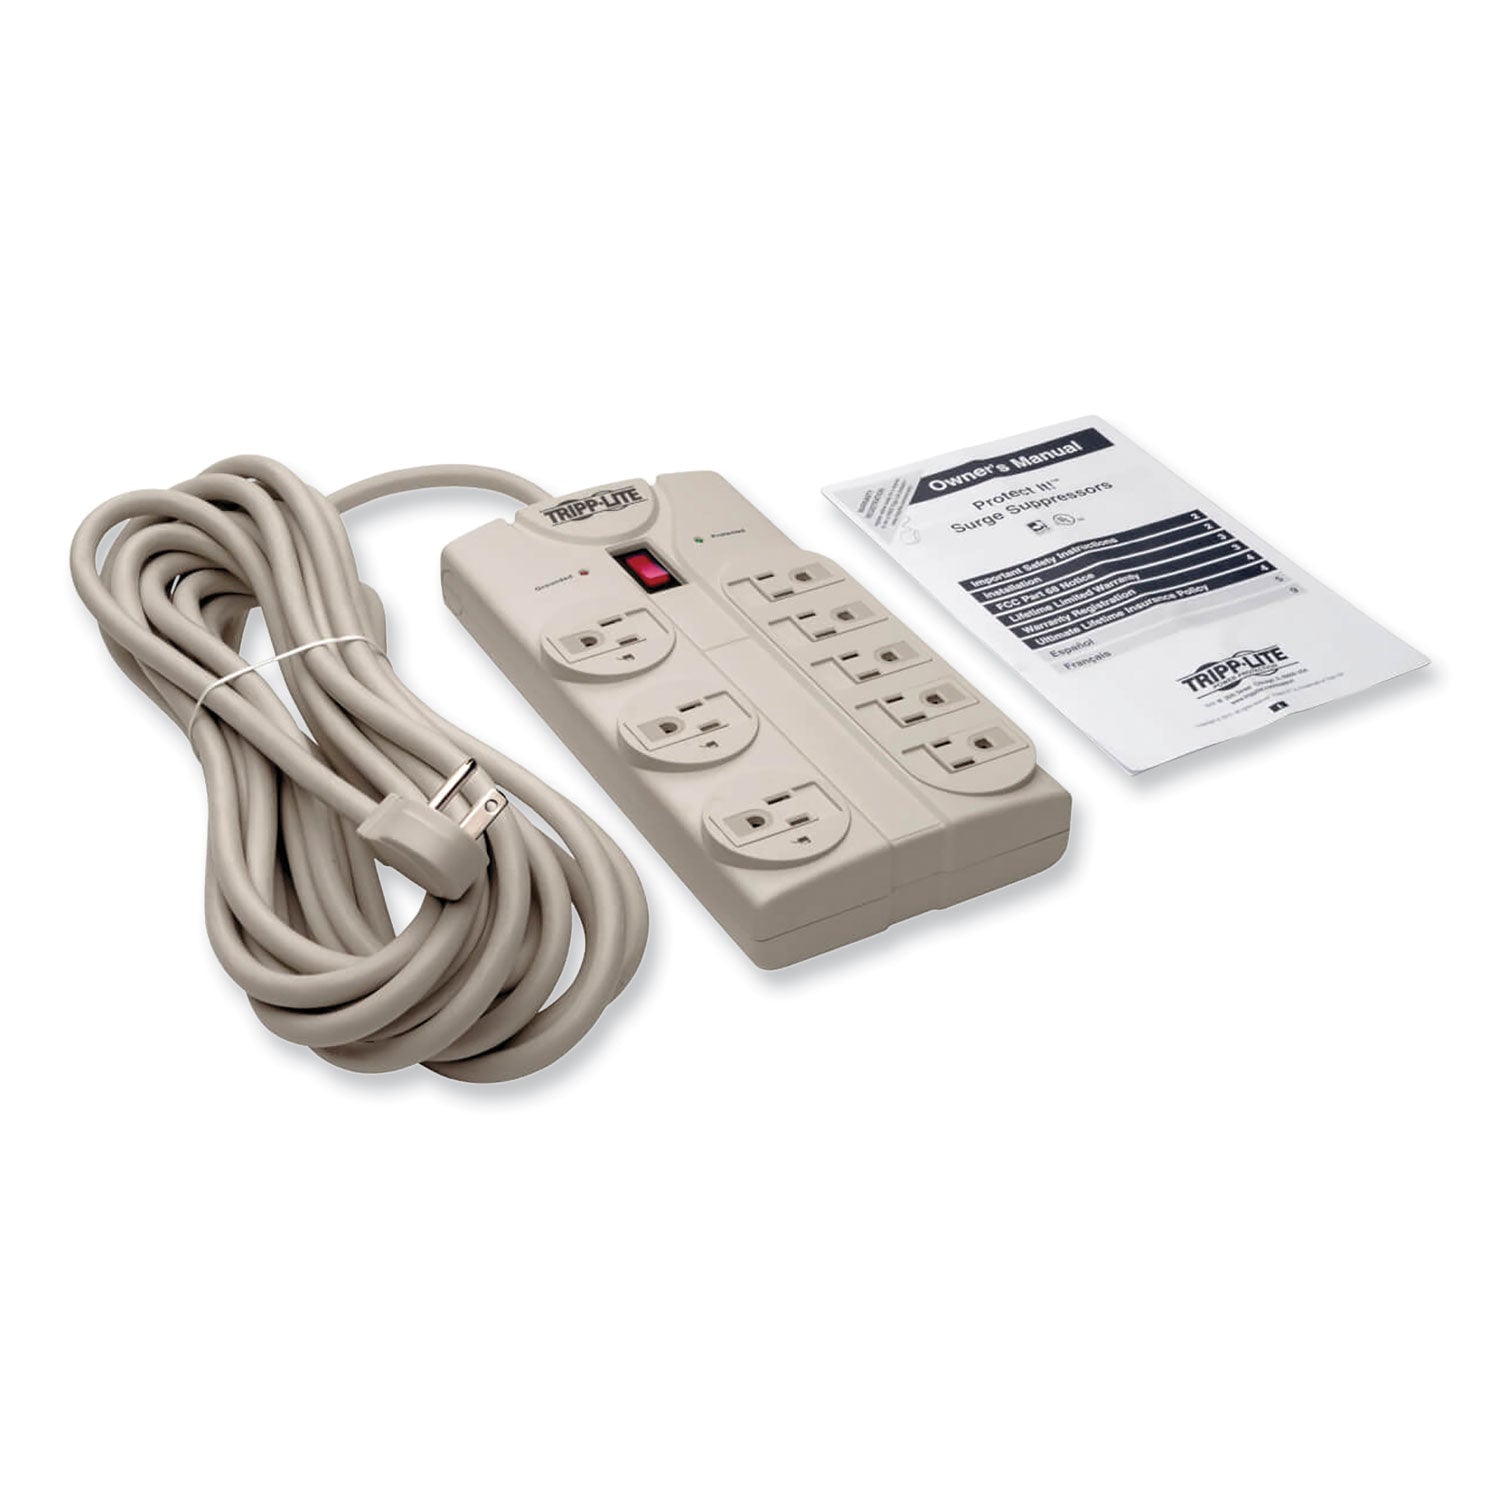 Protect It! Surge Protector, 8 AC Outlets, 25 ft Cord, 1,440 J, Light Gray - 